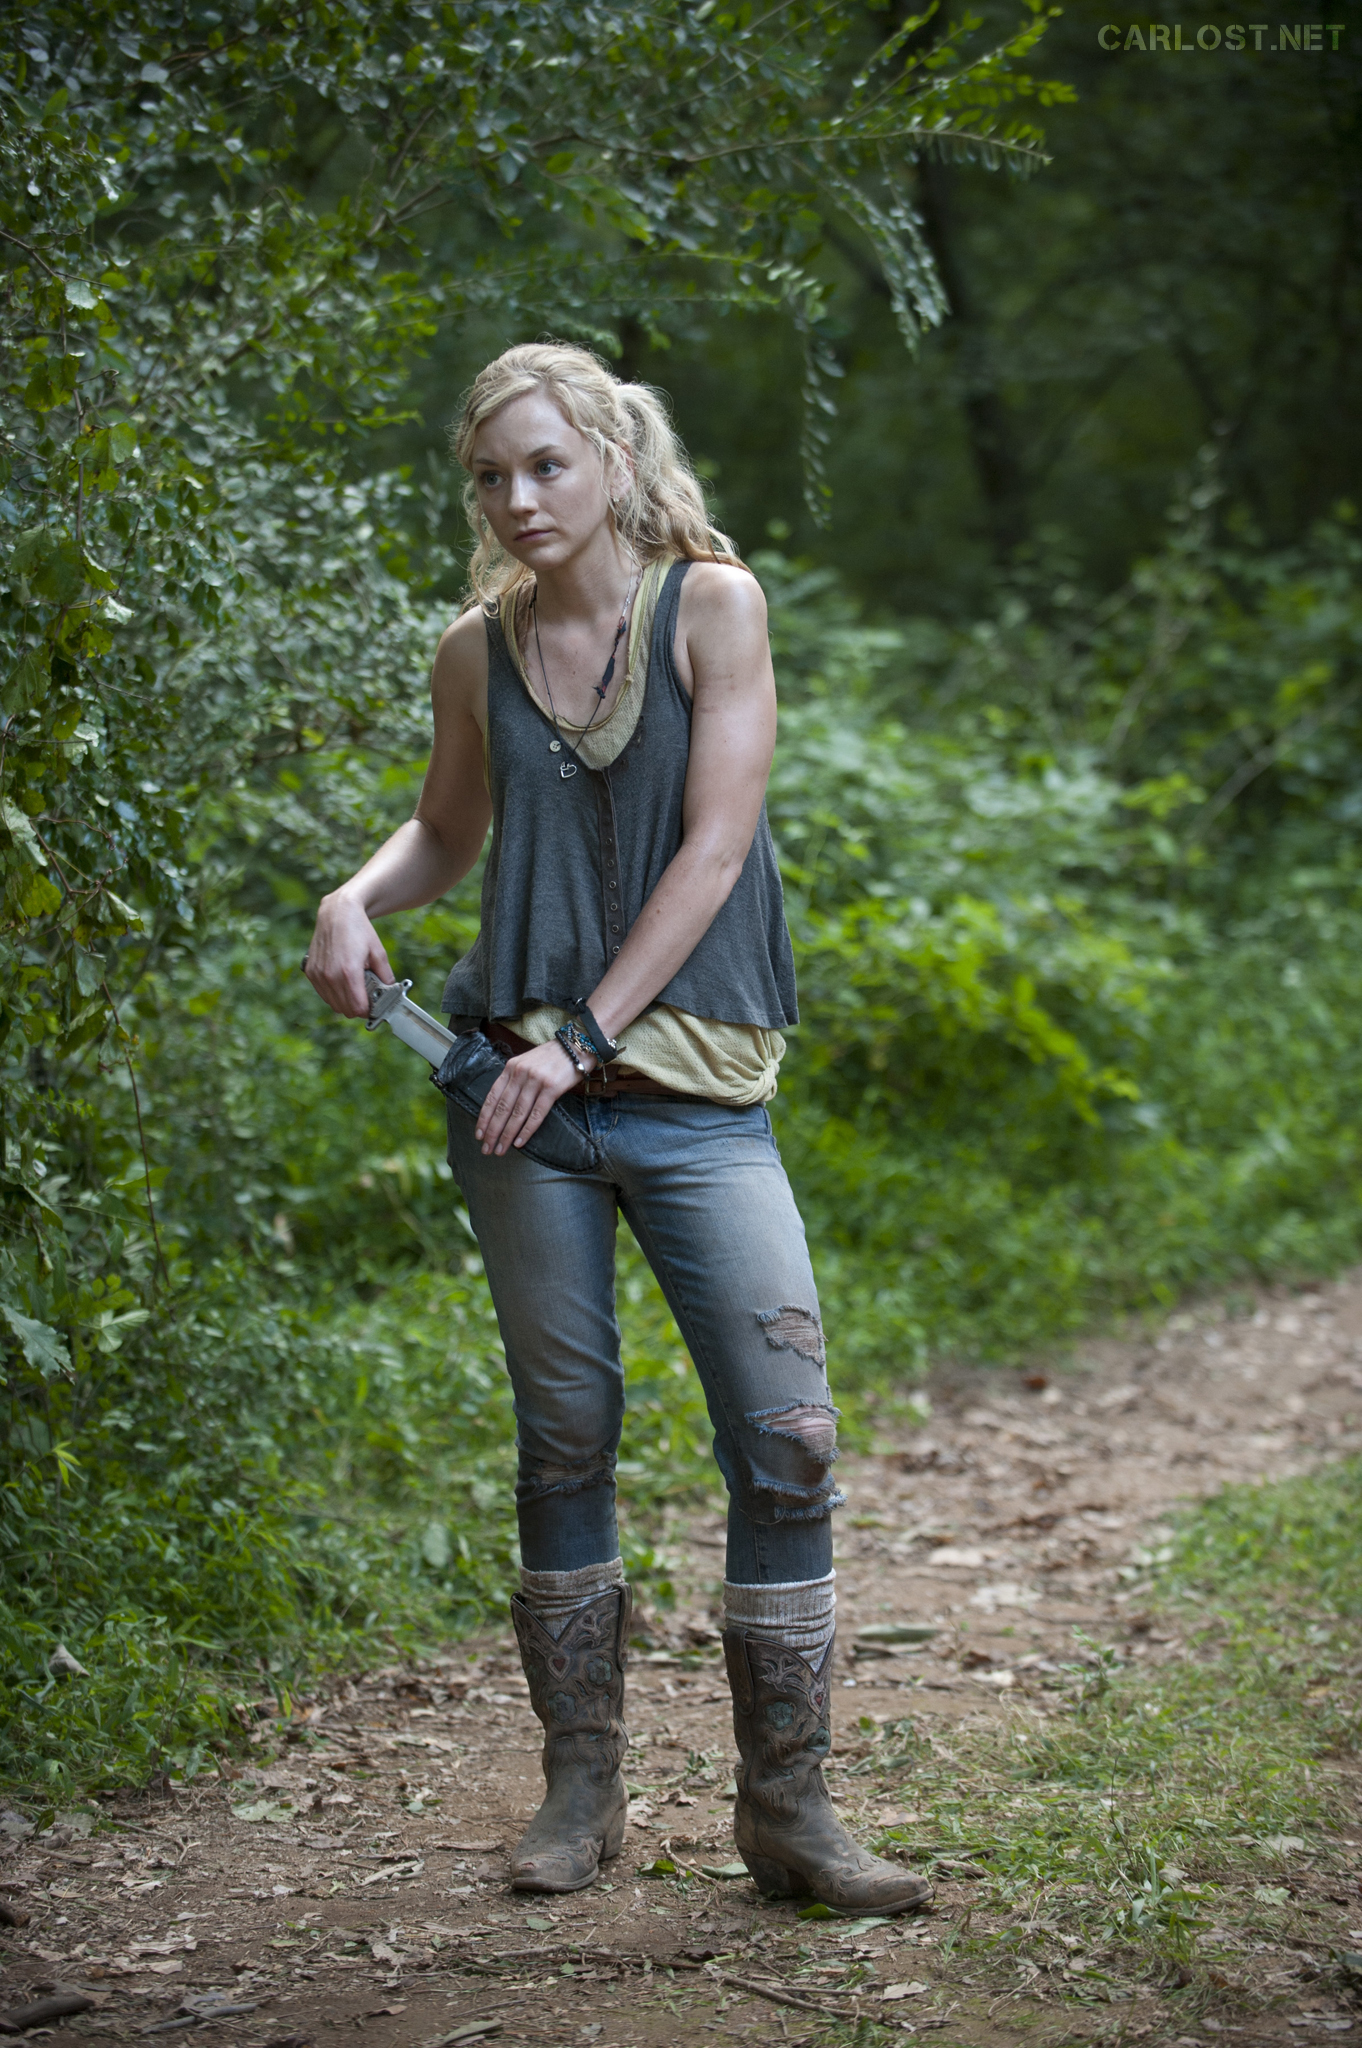 Petite Outfit Ideas: Outfit Inspired by Beth from Walking Dead ...